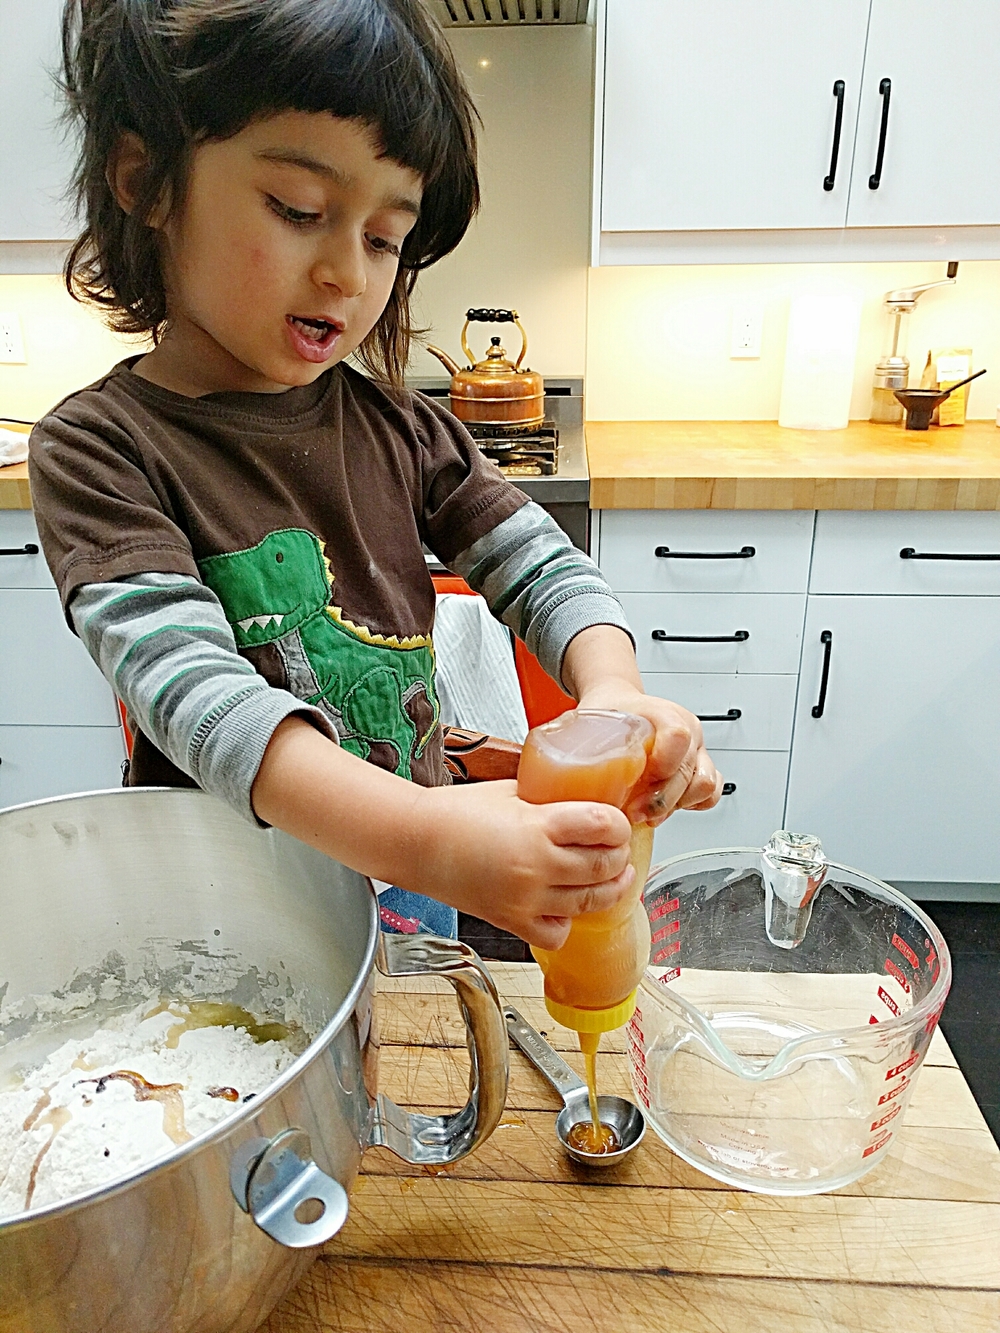 Having a good baker's helper makes all the difference in the world.